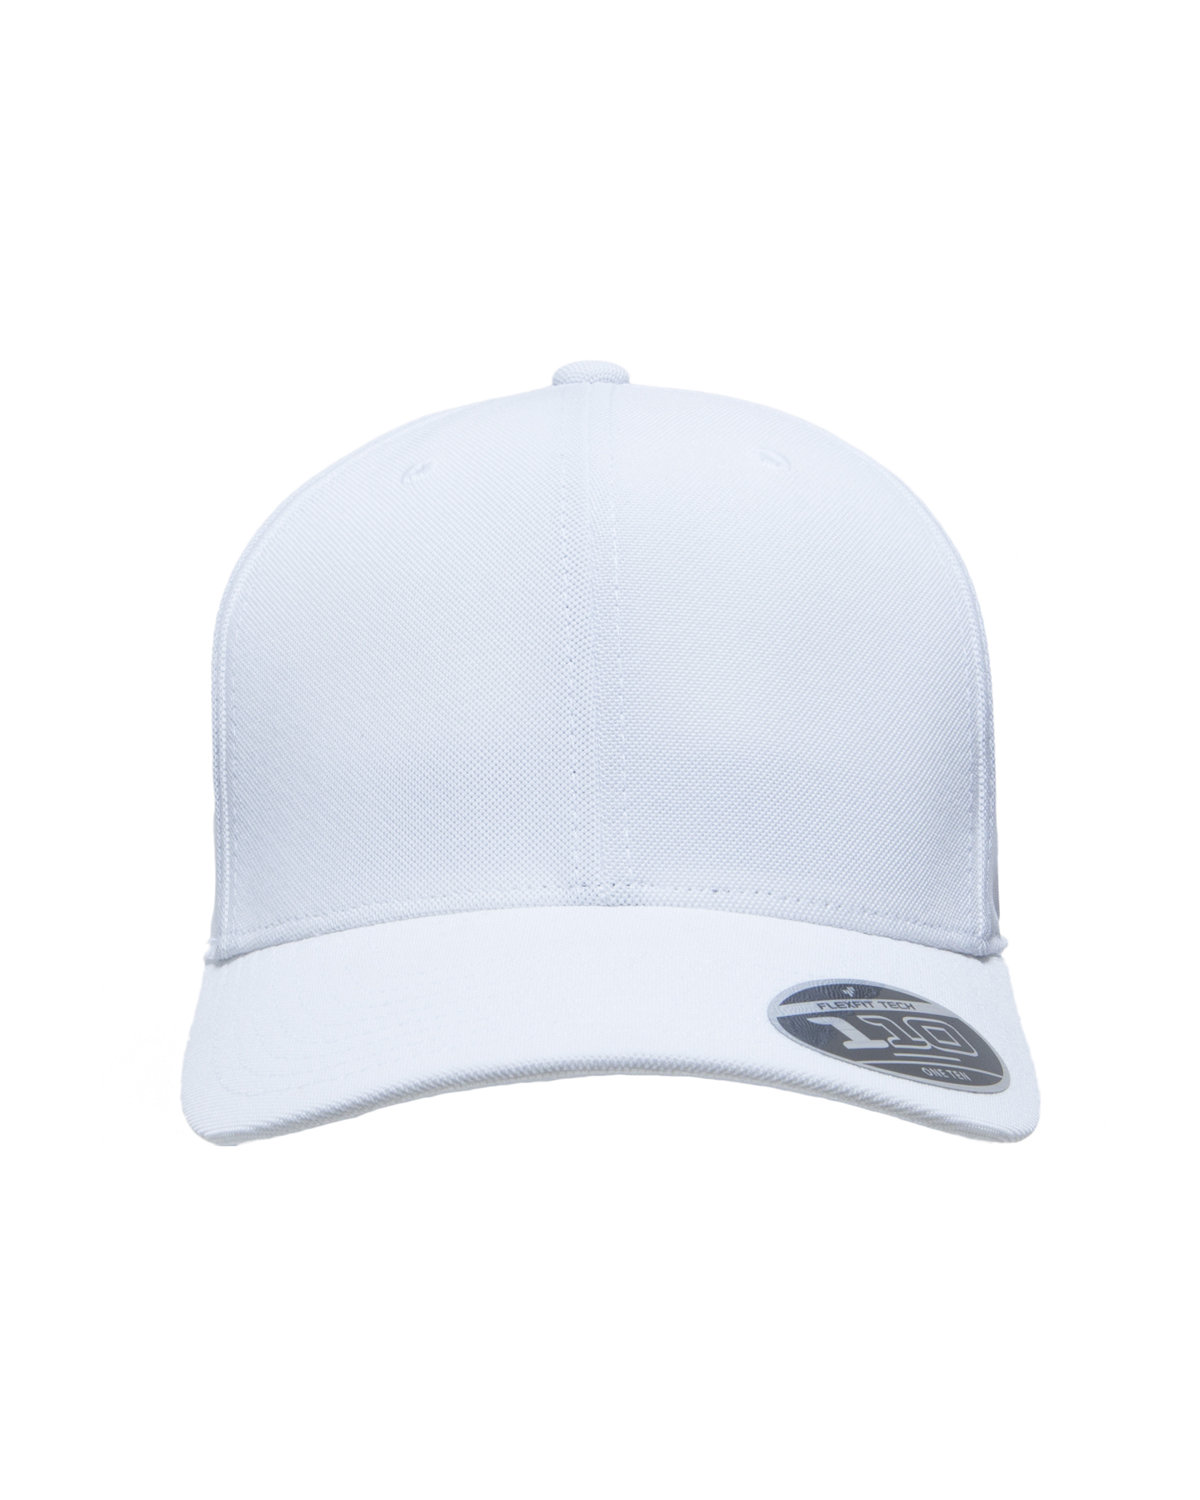 Picture of Team 365 by Flexfit Adult Cool & Dry Mini Pique Performance Cap Brand Logo for Yupoong